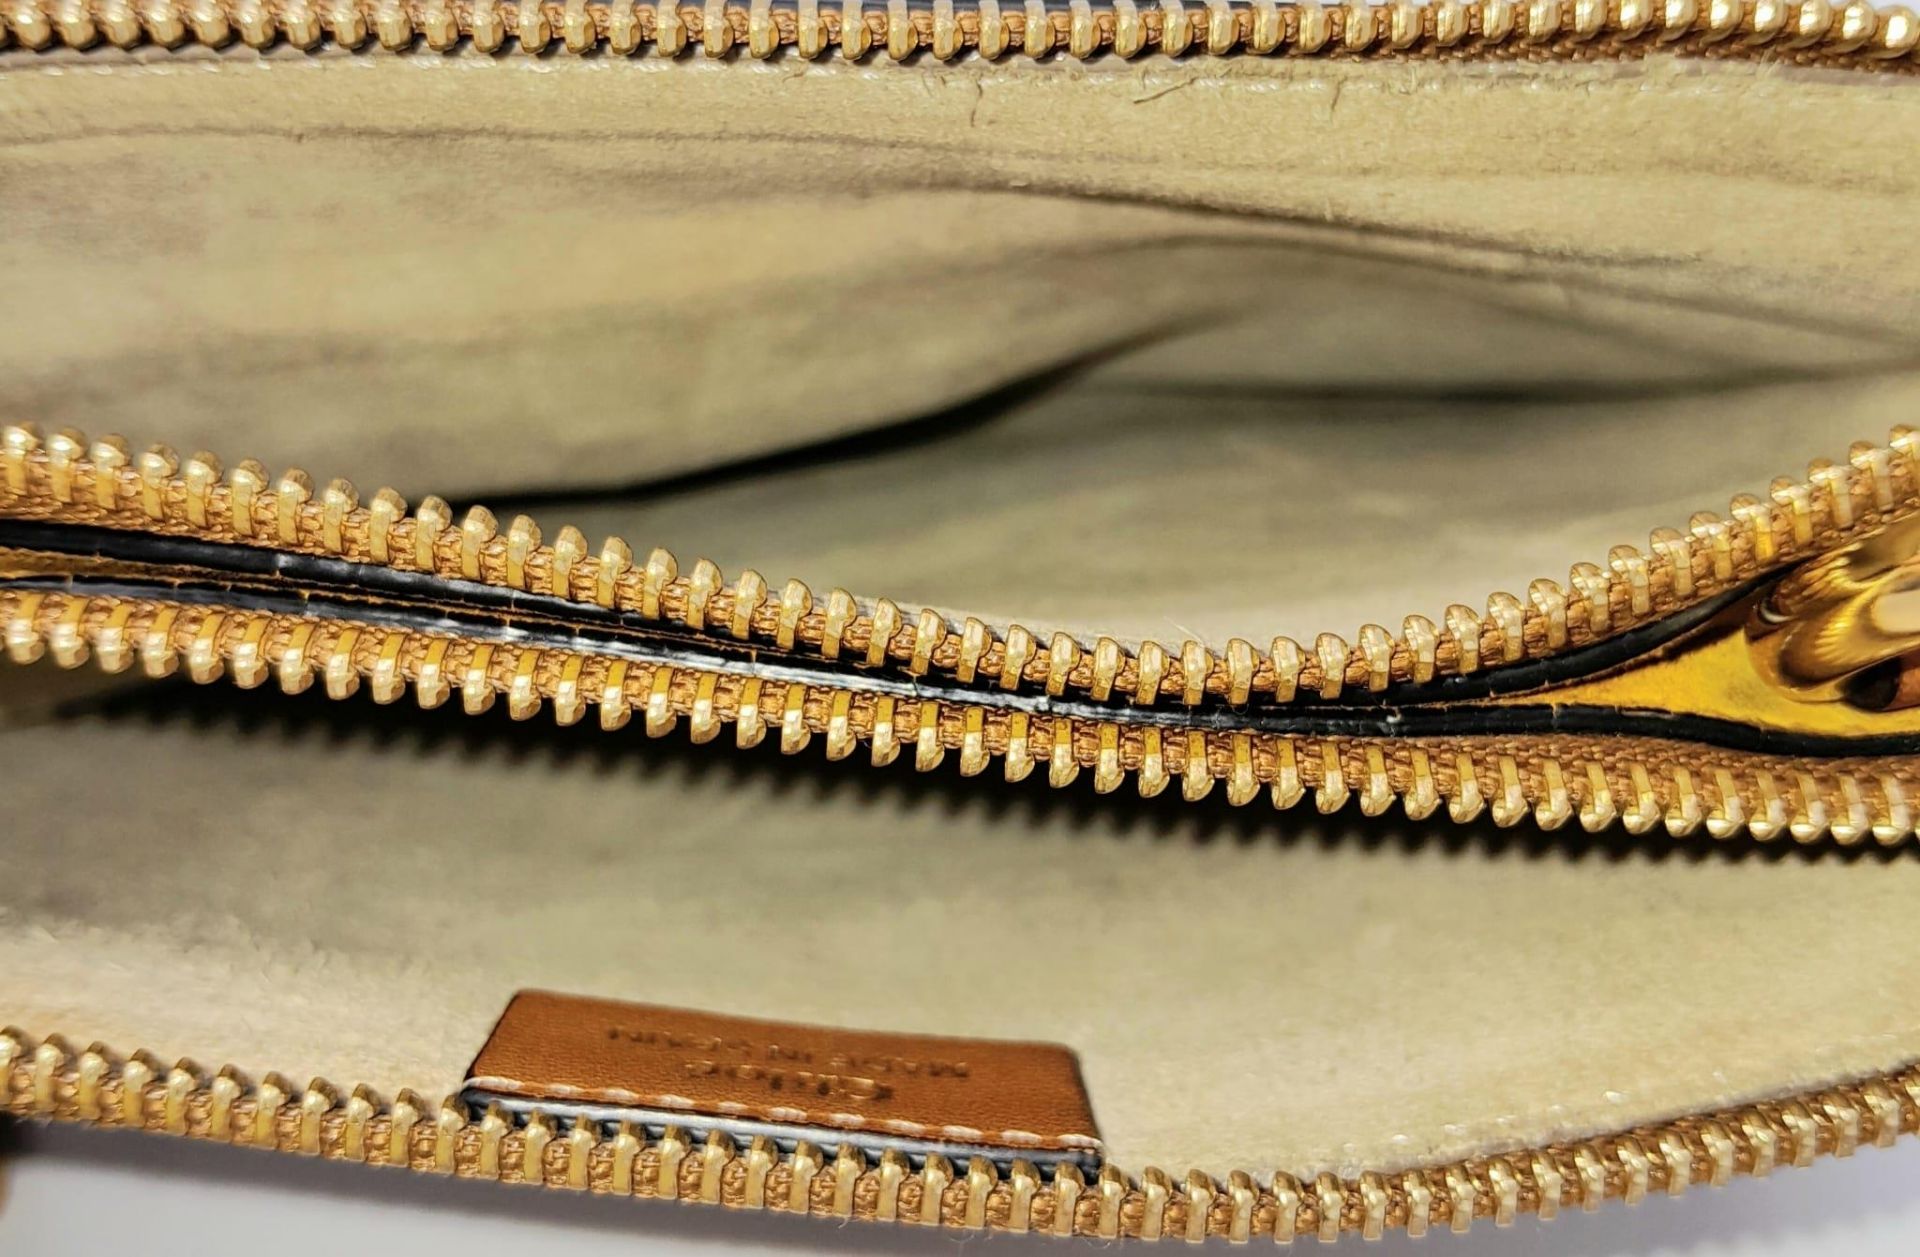 A Chloe Brown and Mustard 'Jane' Shoulder Bag. Leather and suede exterior with gold-toned - Image 6 of 8